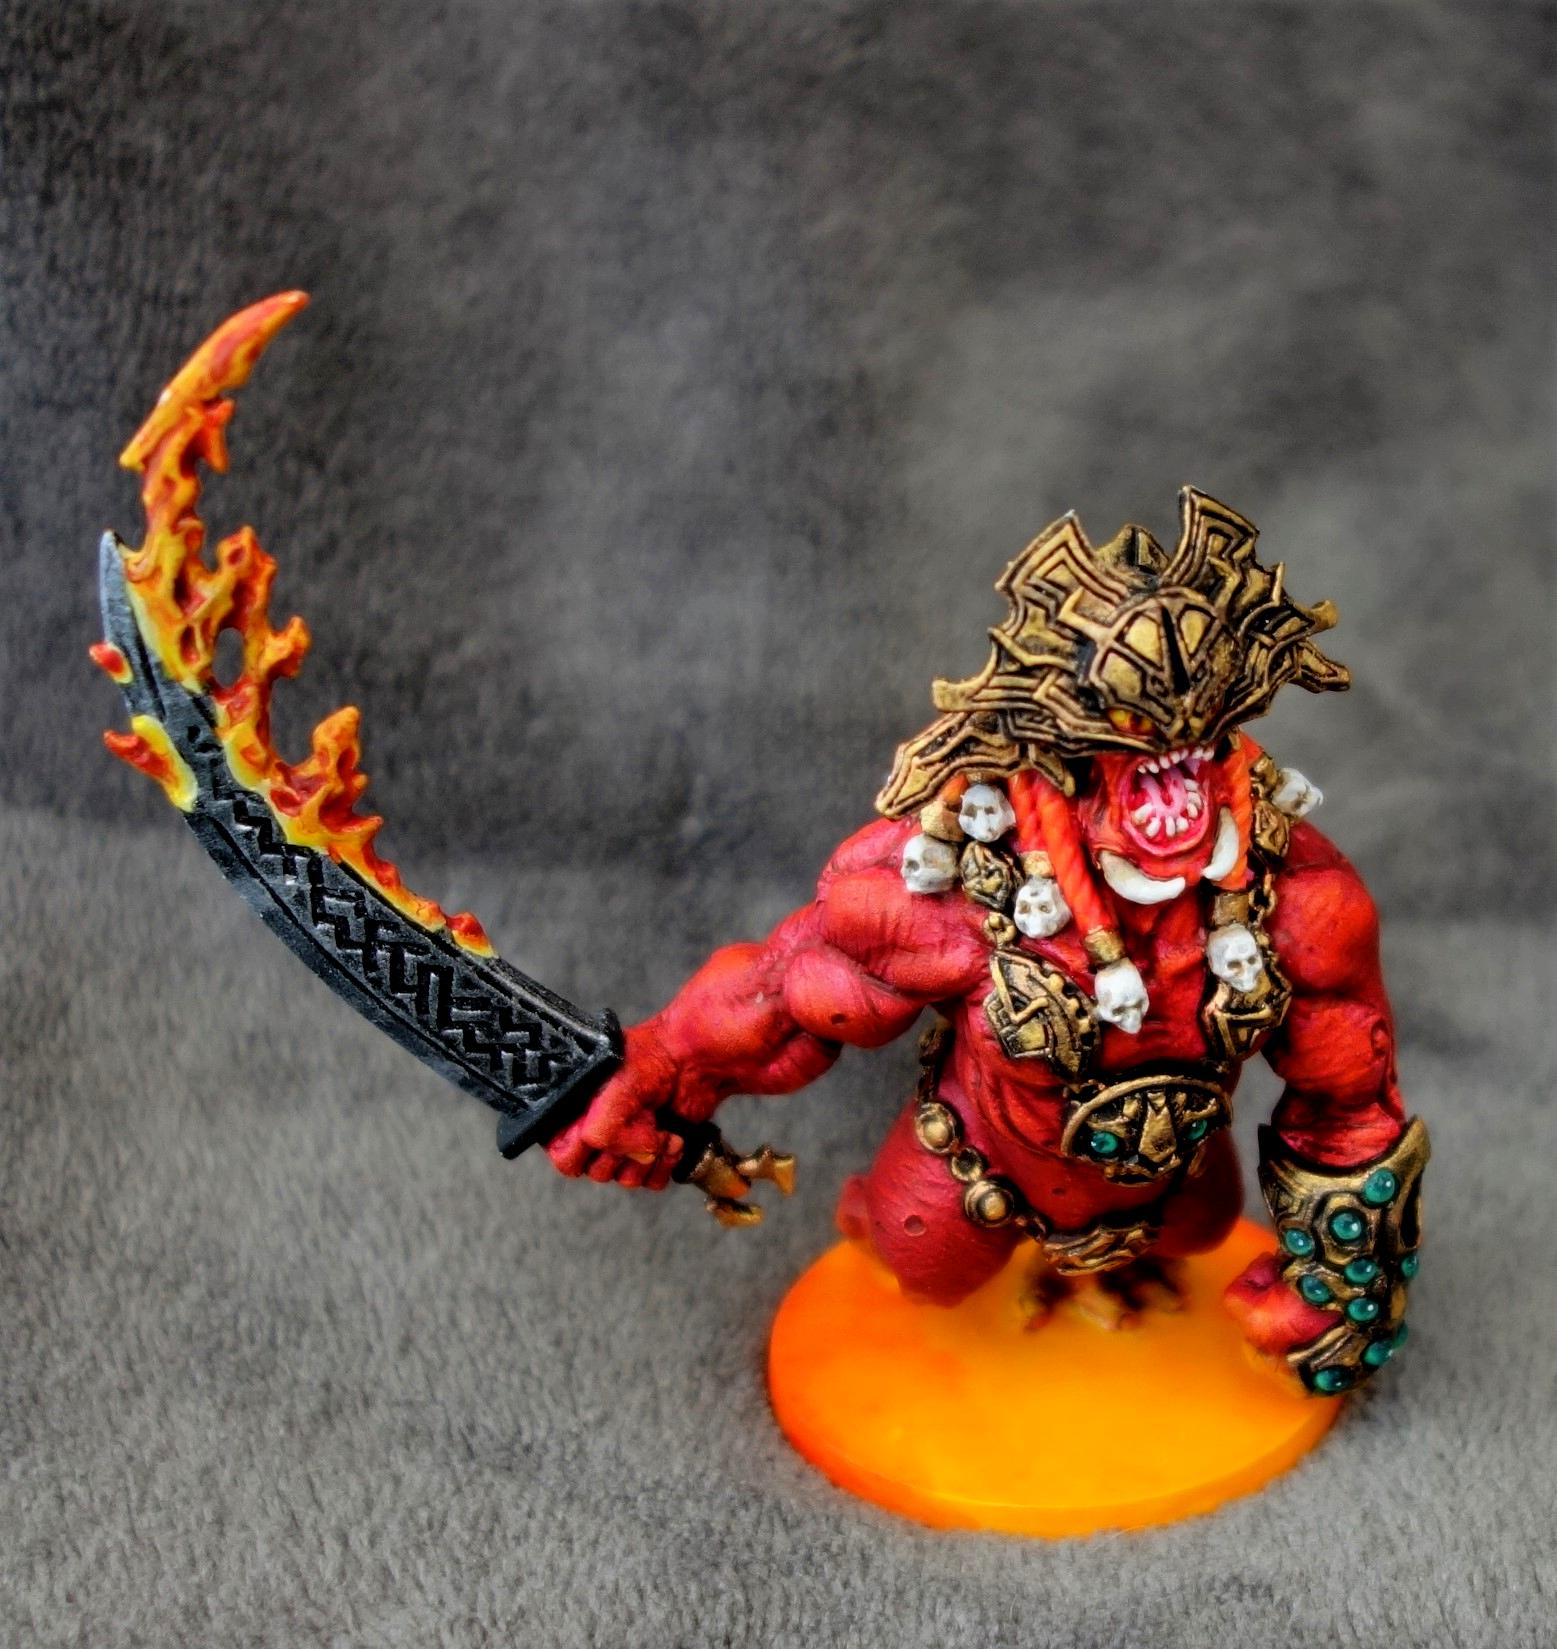 Bloodrage, Fire Giant, Giant